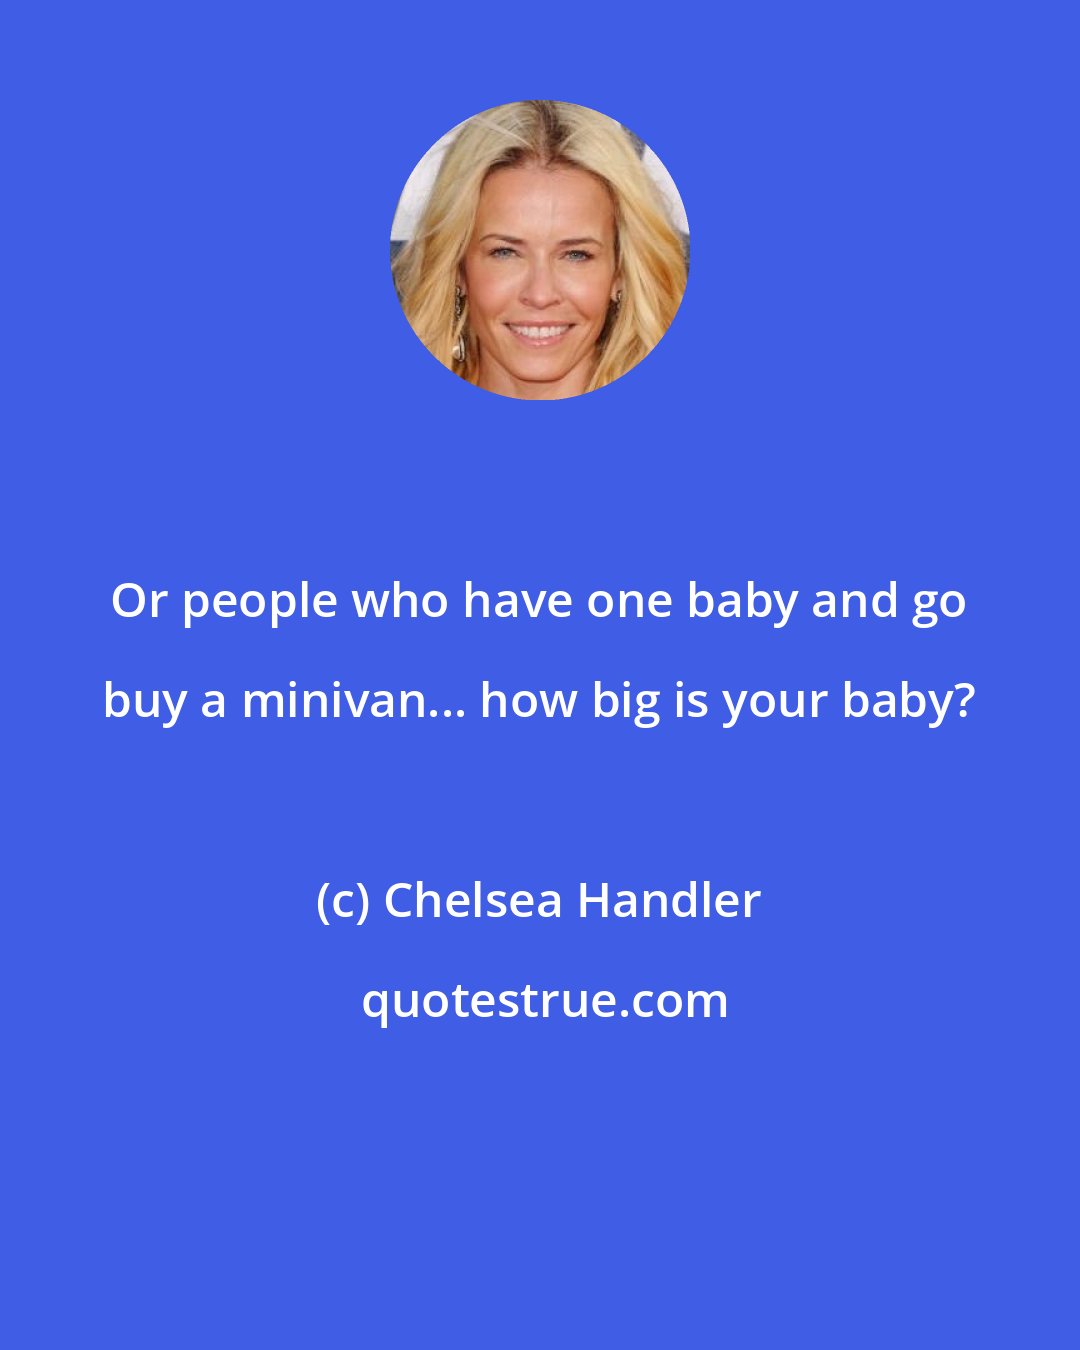 Chelsea Handler: Or people who have one baby and go buy a minivan... how big is your baby?